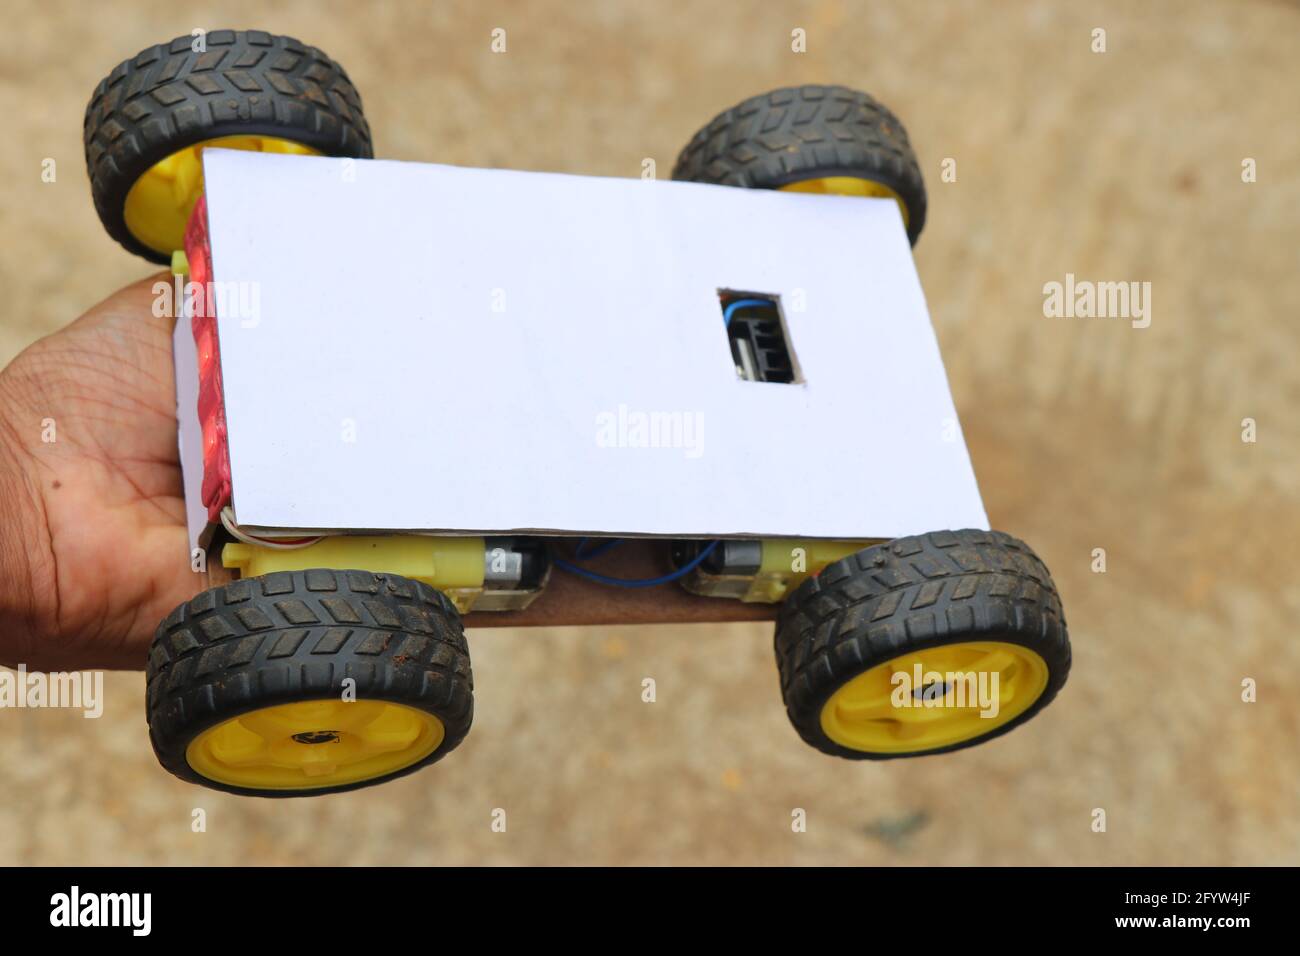 Robotic car having 4 wheels all powered by powerful plastic geared motors held in hand. Smartphone controlled robotic car project working model Stock Photo